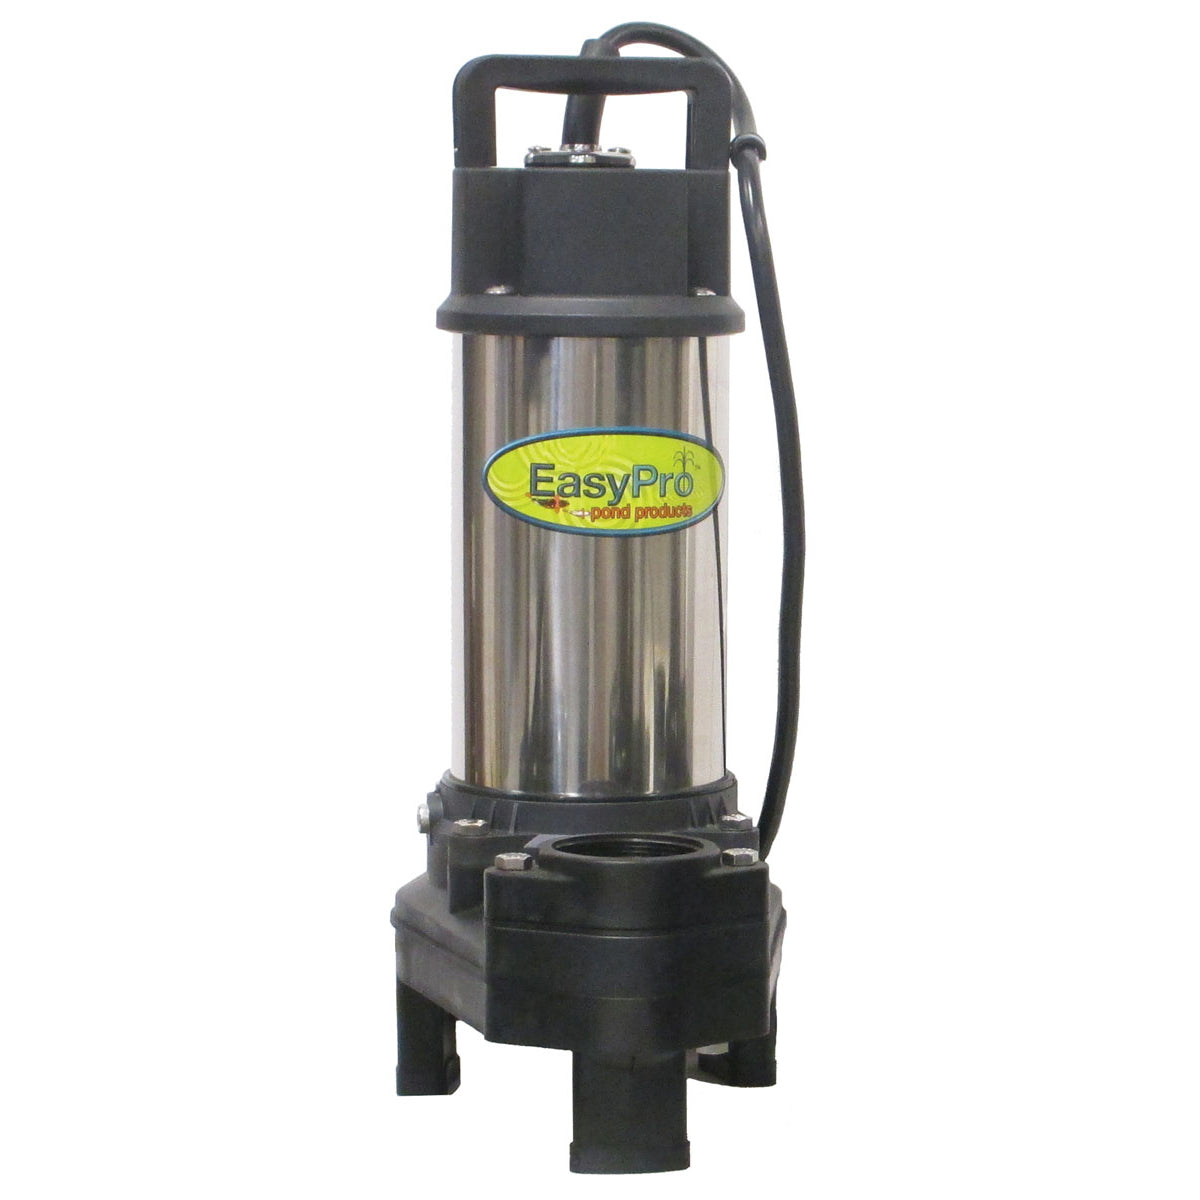 TH750 - 6,000 GPH 115V Stainless Steel Waterfall and Stream Pump